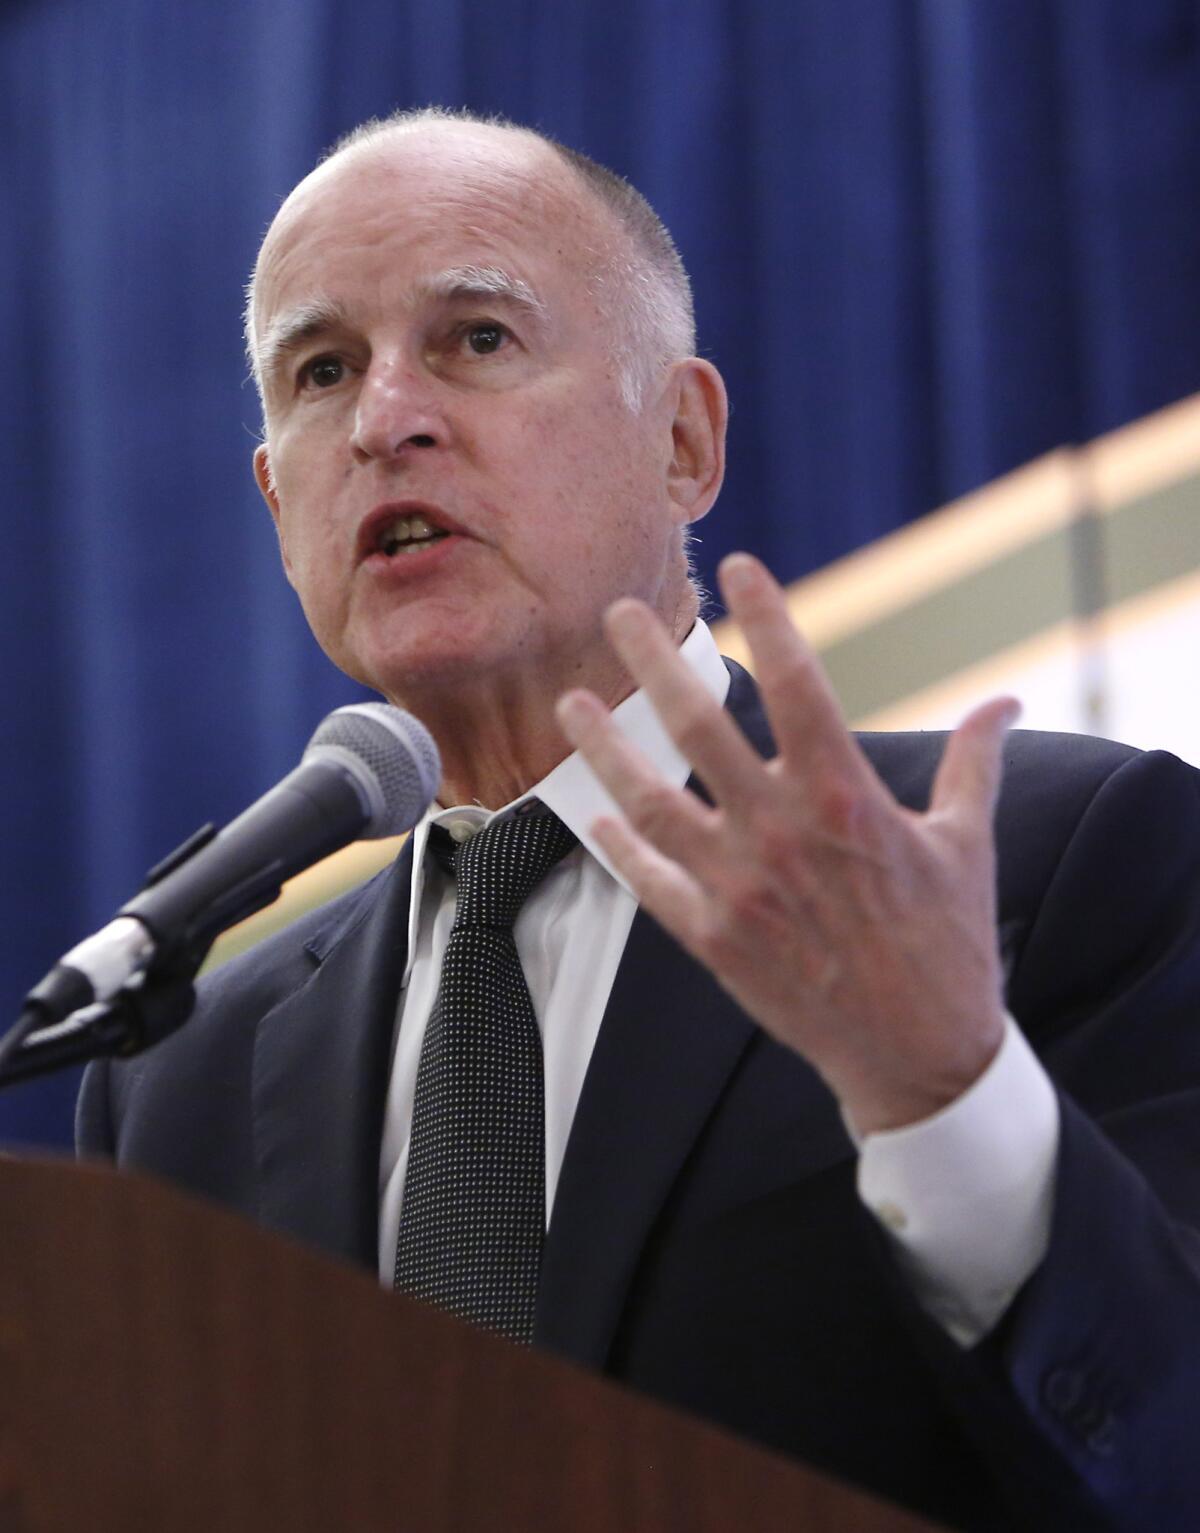 Gov. Jerry Brown is now considering whether to sign or veto AB 1229, a bill to authorize cities to require affordable units as a condition of development.